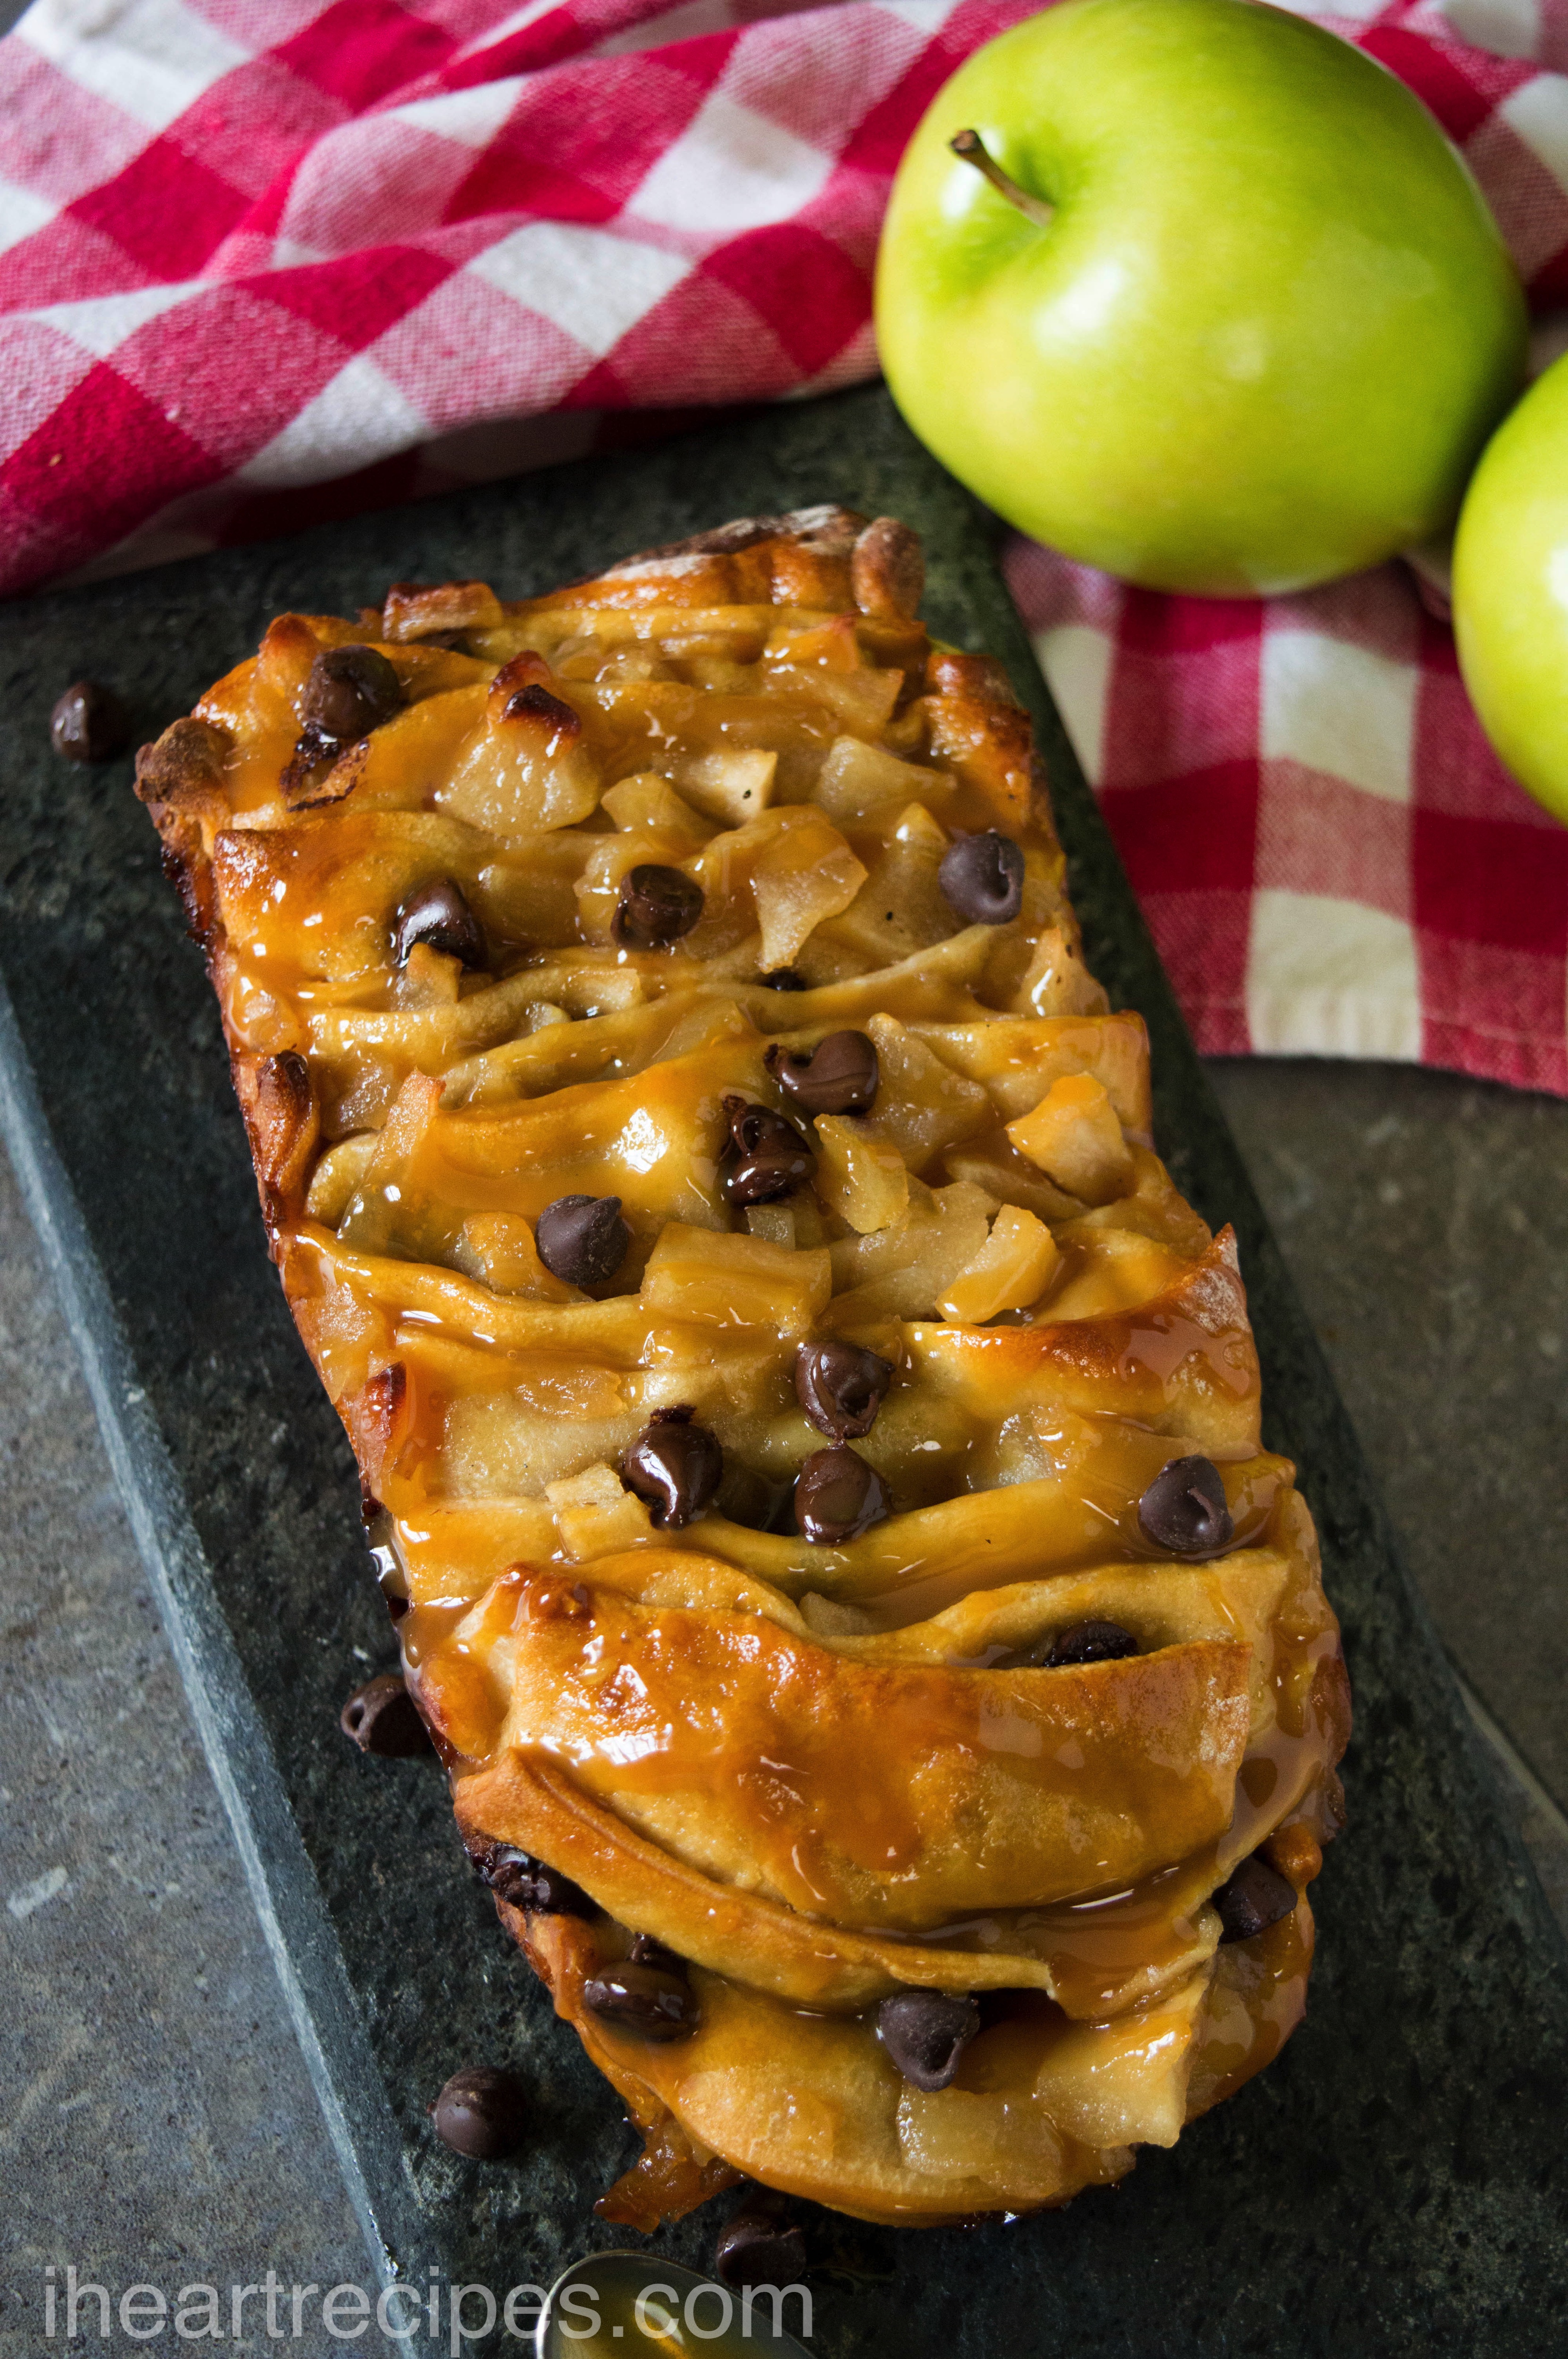 Caramel Apple Pull Apart Bread is a great dessert or party treat